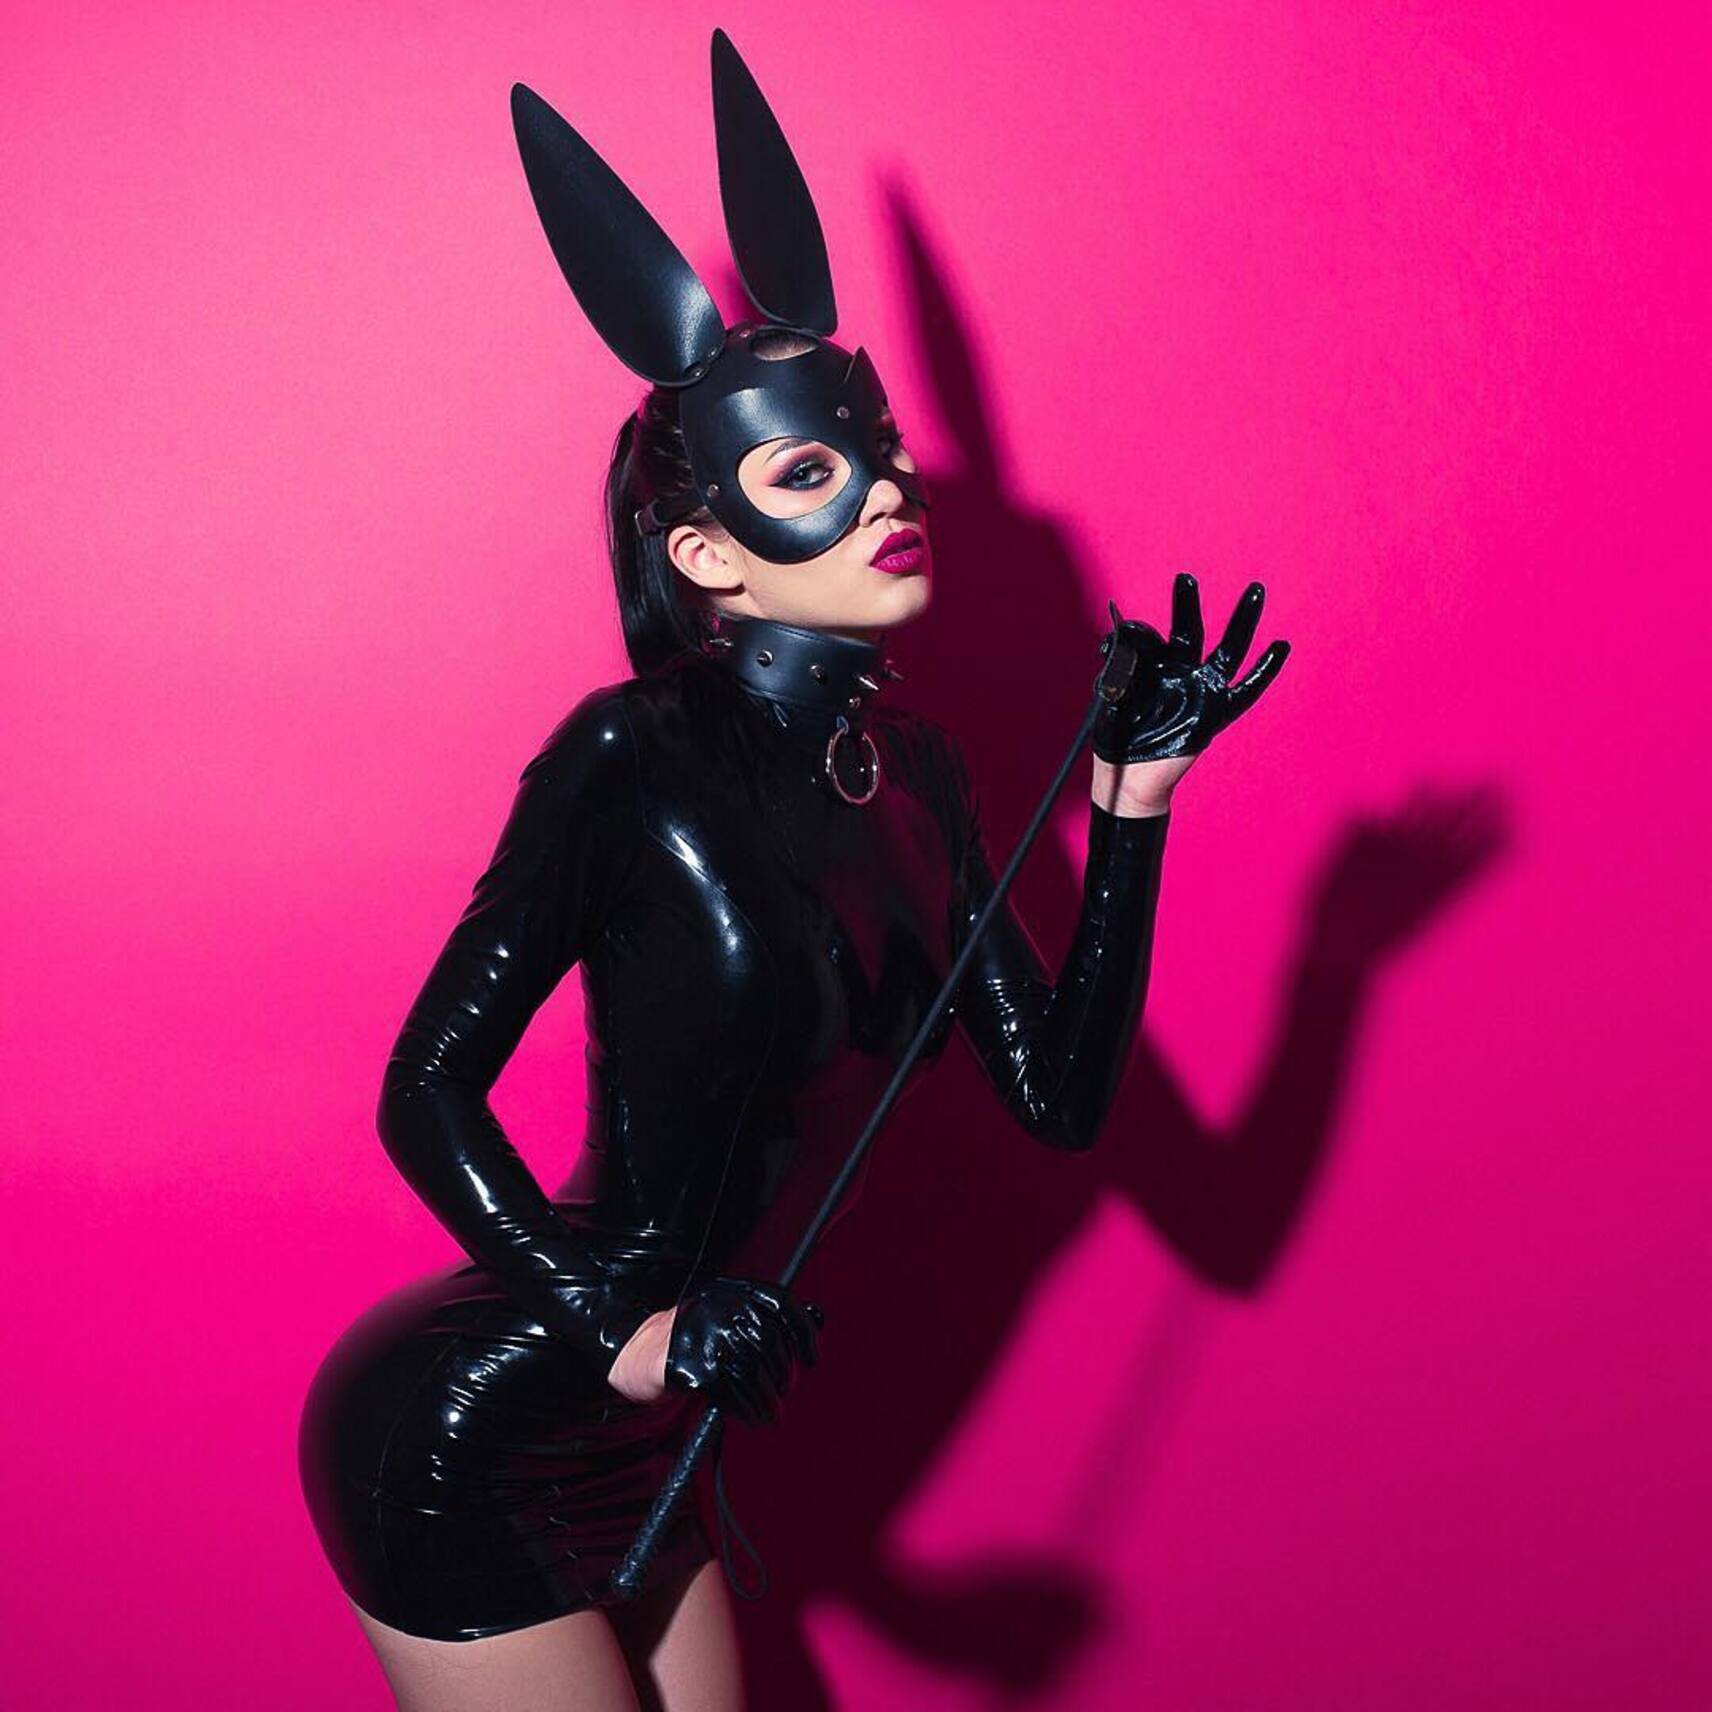 Leather black sexy bunny mask black with slits for eyes and clasp at the back